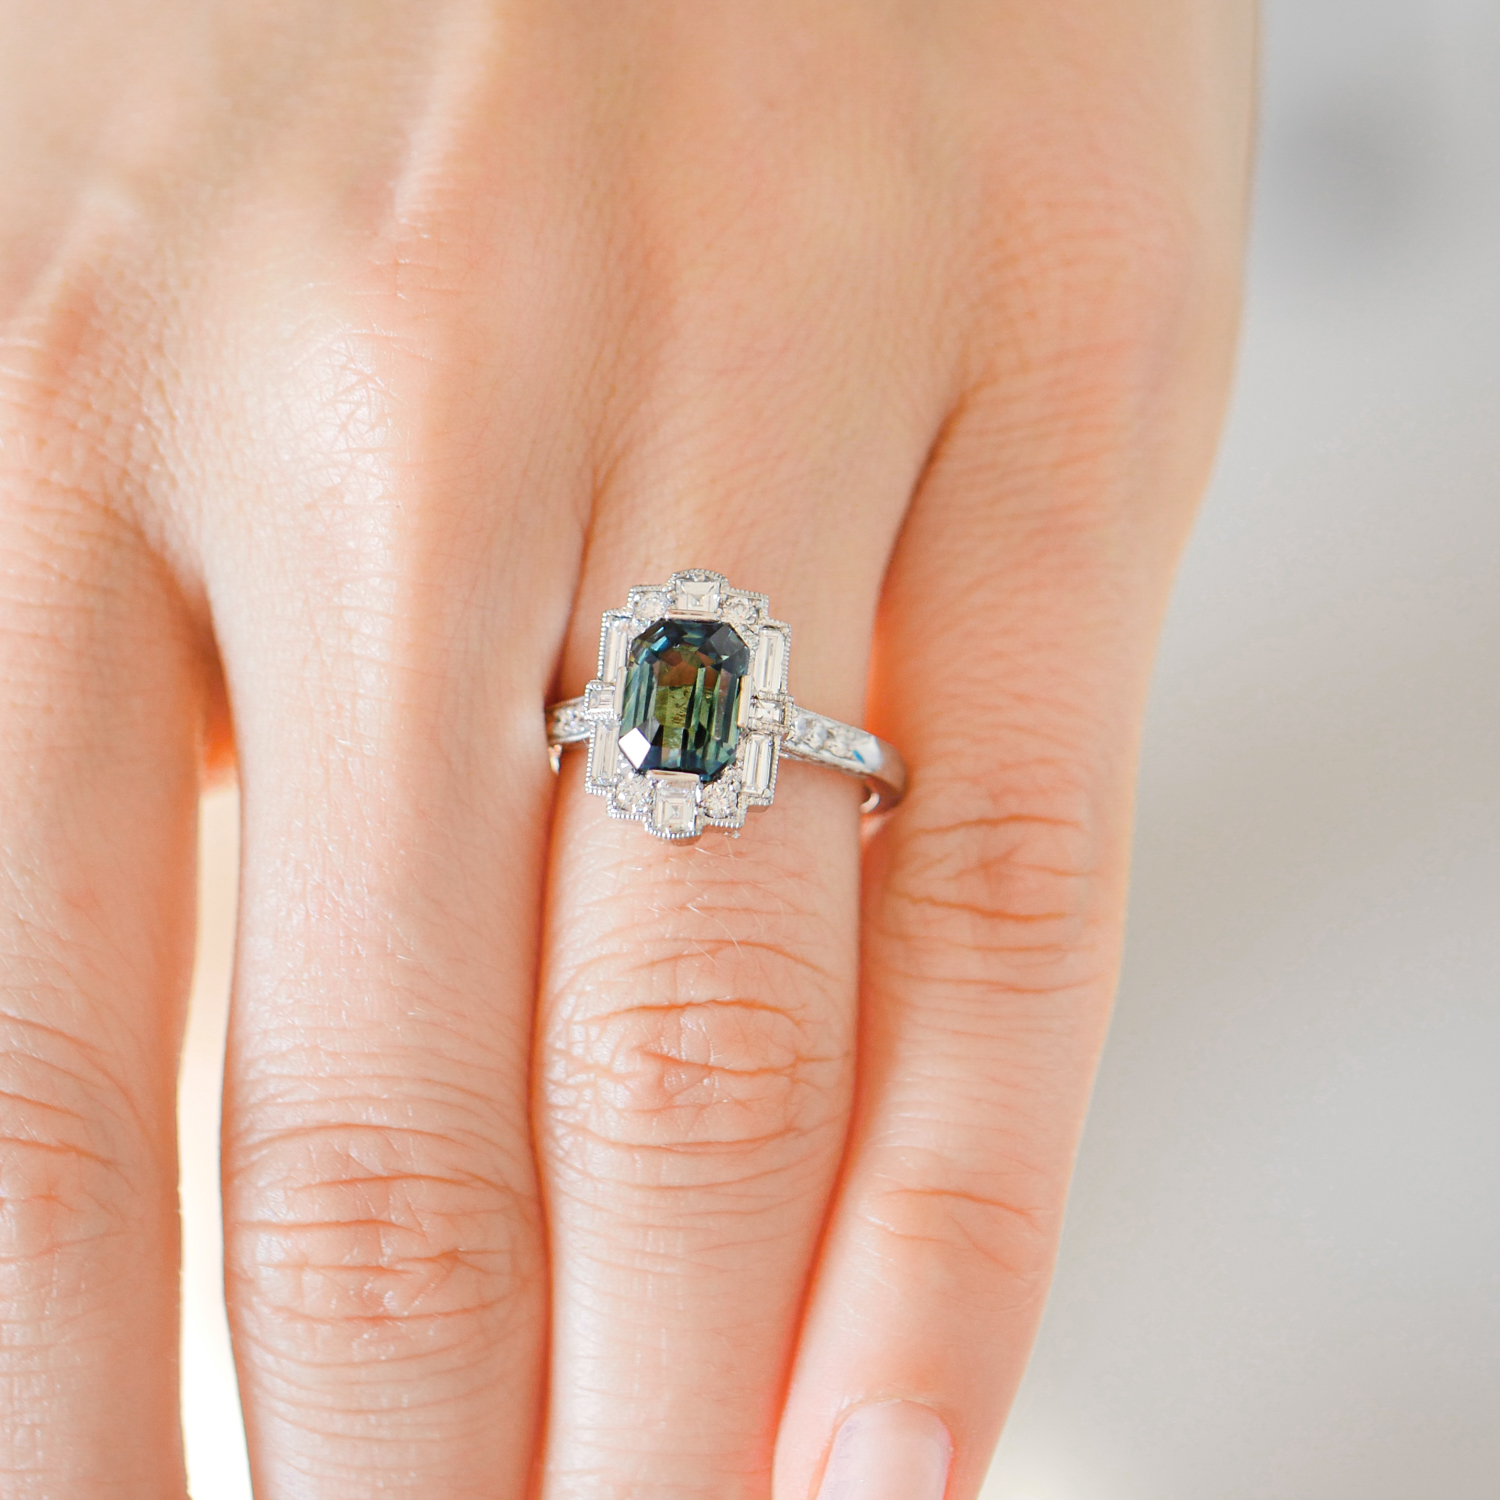 Blue Green Emerald Cut Sapphire Deco Halo Engagement Ring